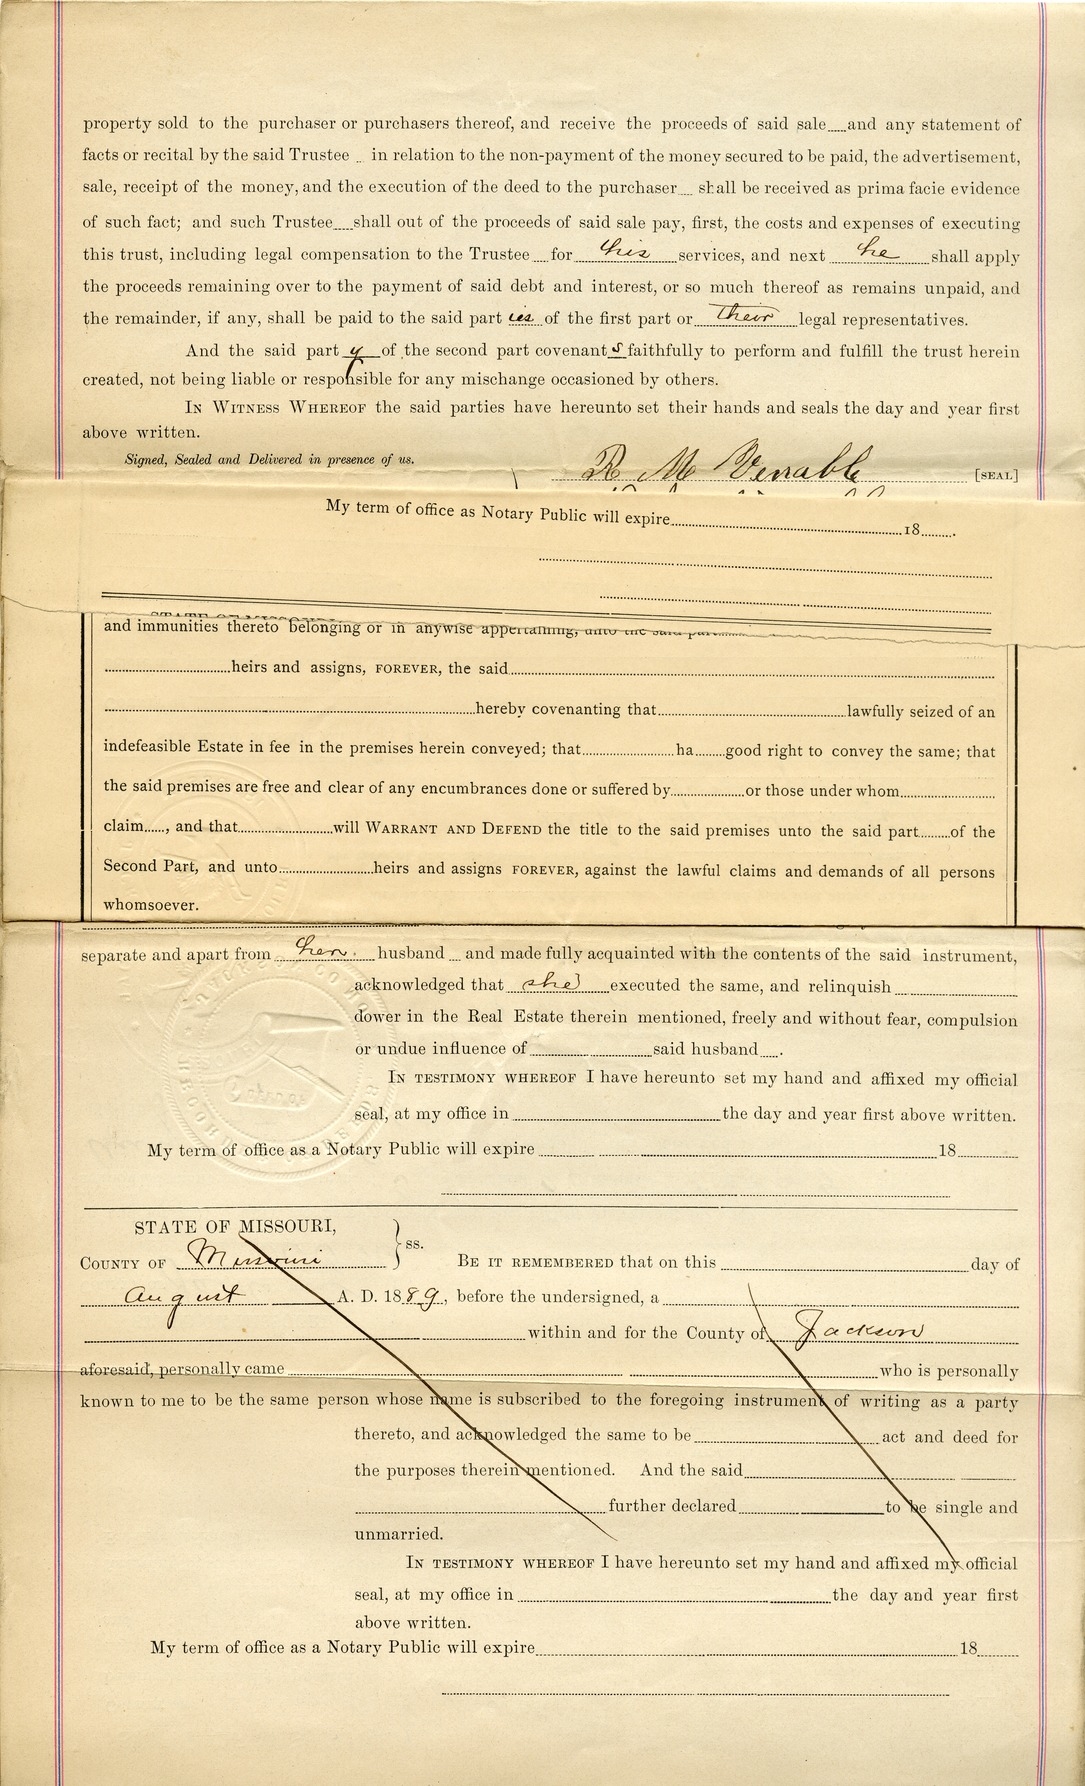 Trust Deed from A. M. Venables and N. M. Venables to D. W. Wallace for Barney Riley and Sarah R. Riley